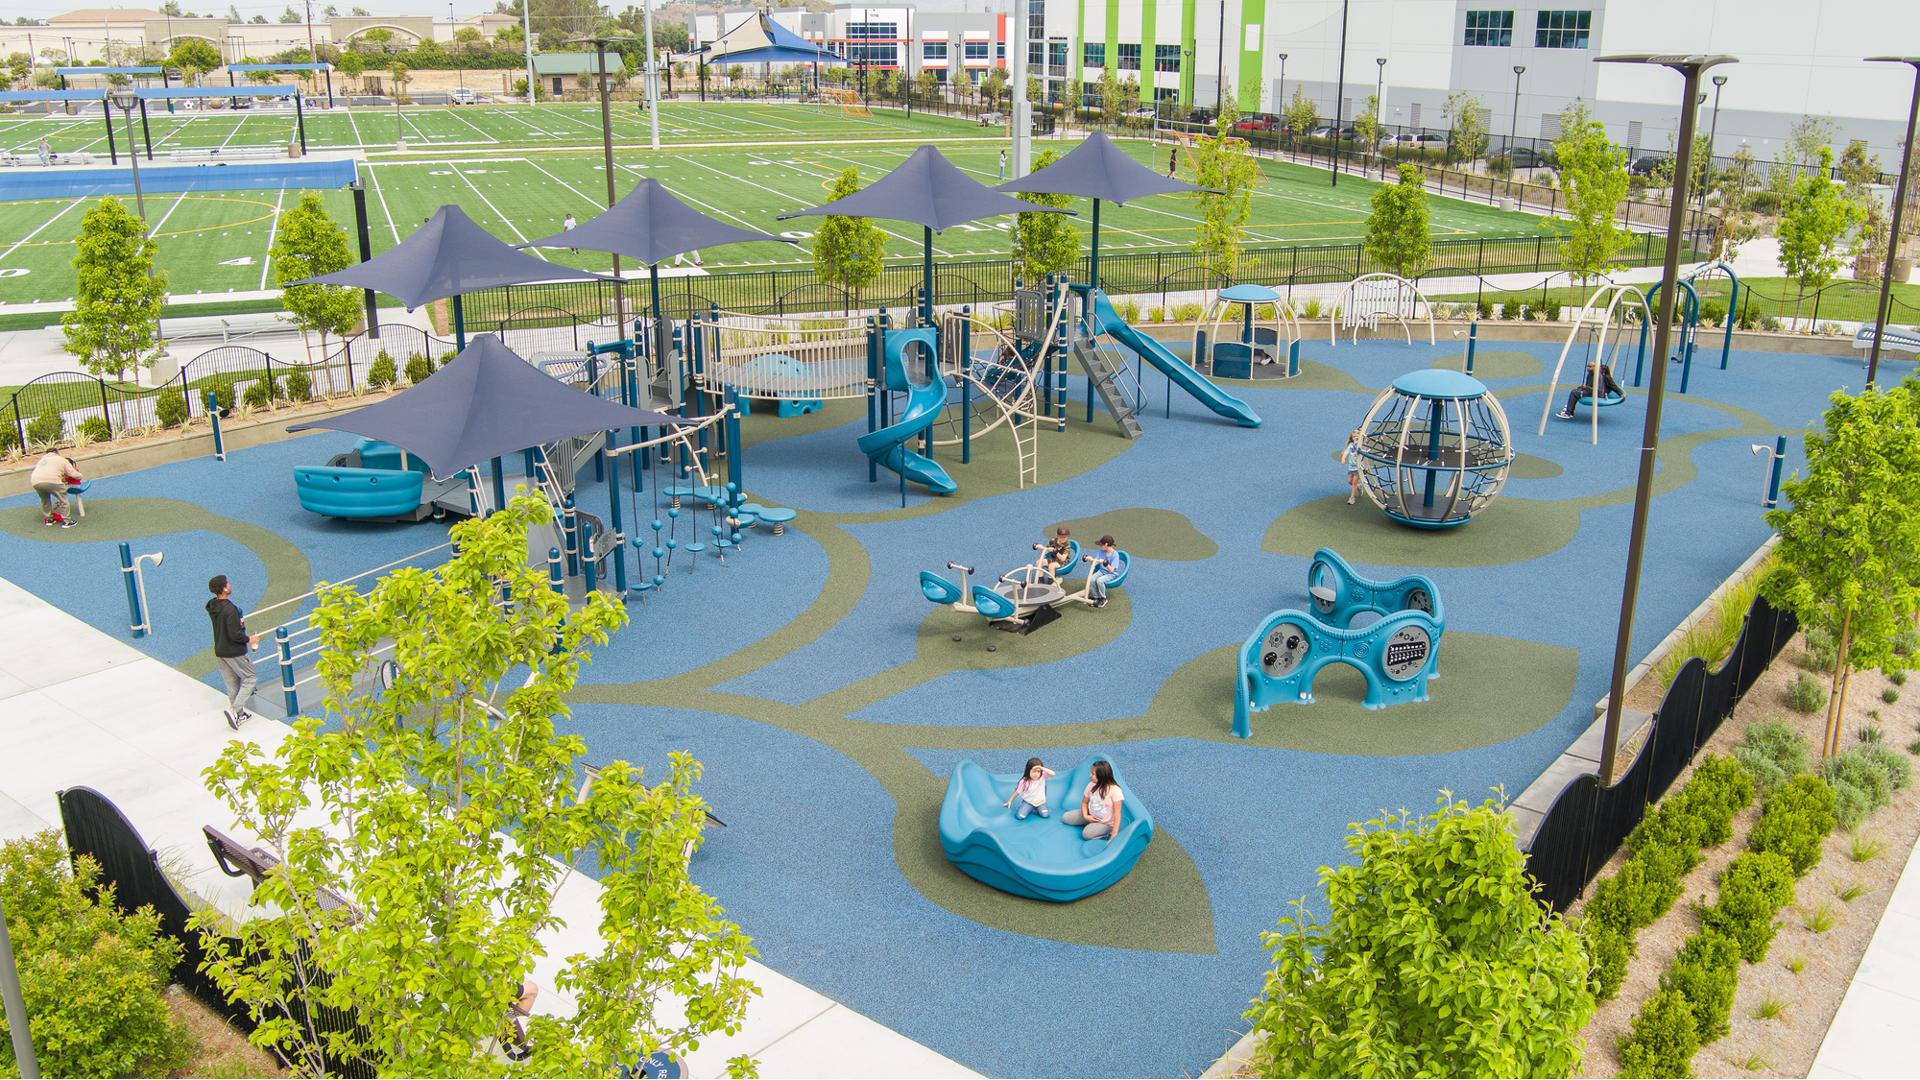 Elevated view of a triangular shaped play area colored in blue and greens with inclusive play activities for all abilities.